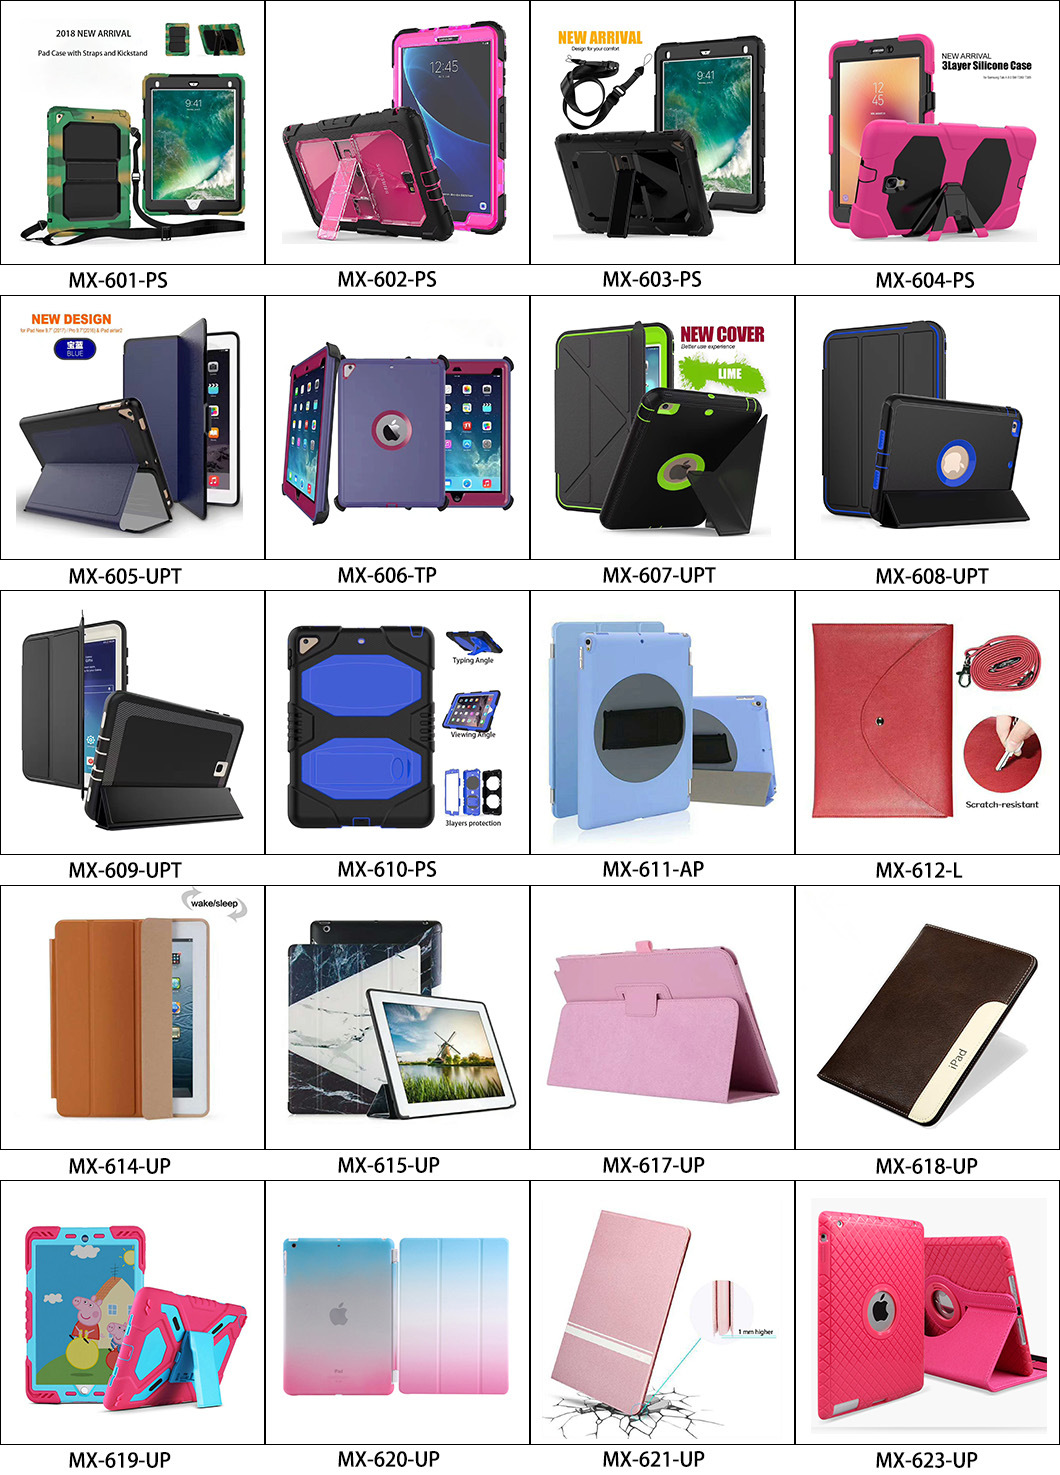 Anti-Slip Bag Tablet PU Case Cover for iPad/Samsung